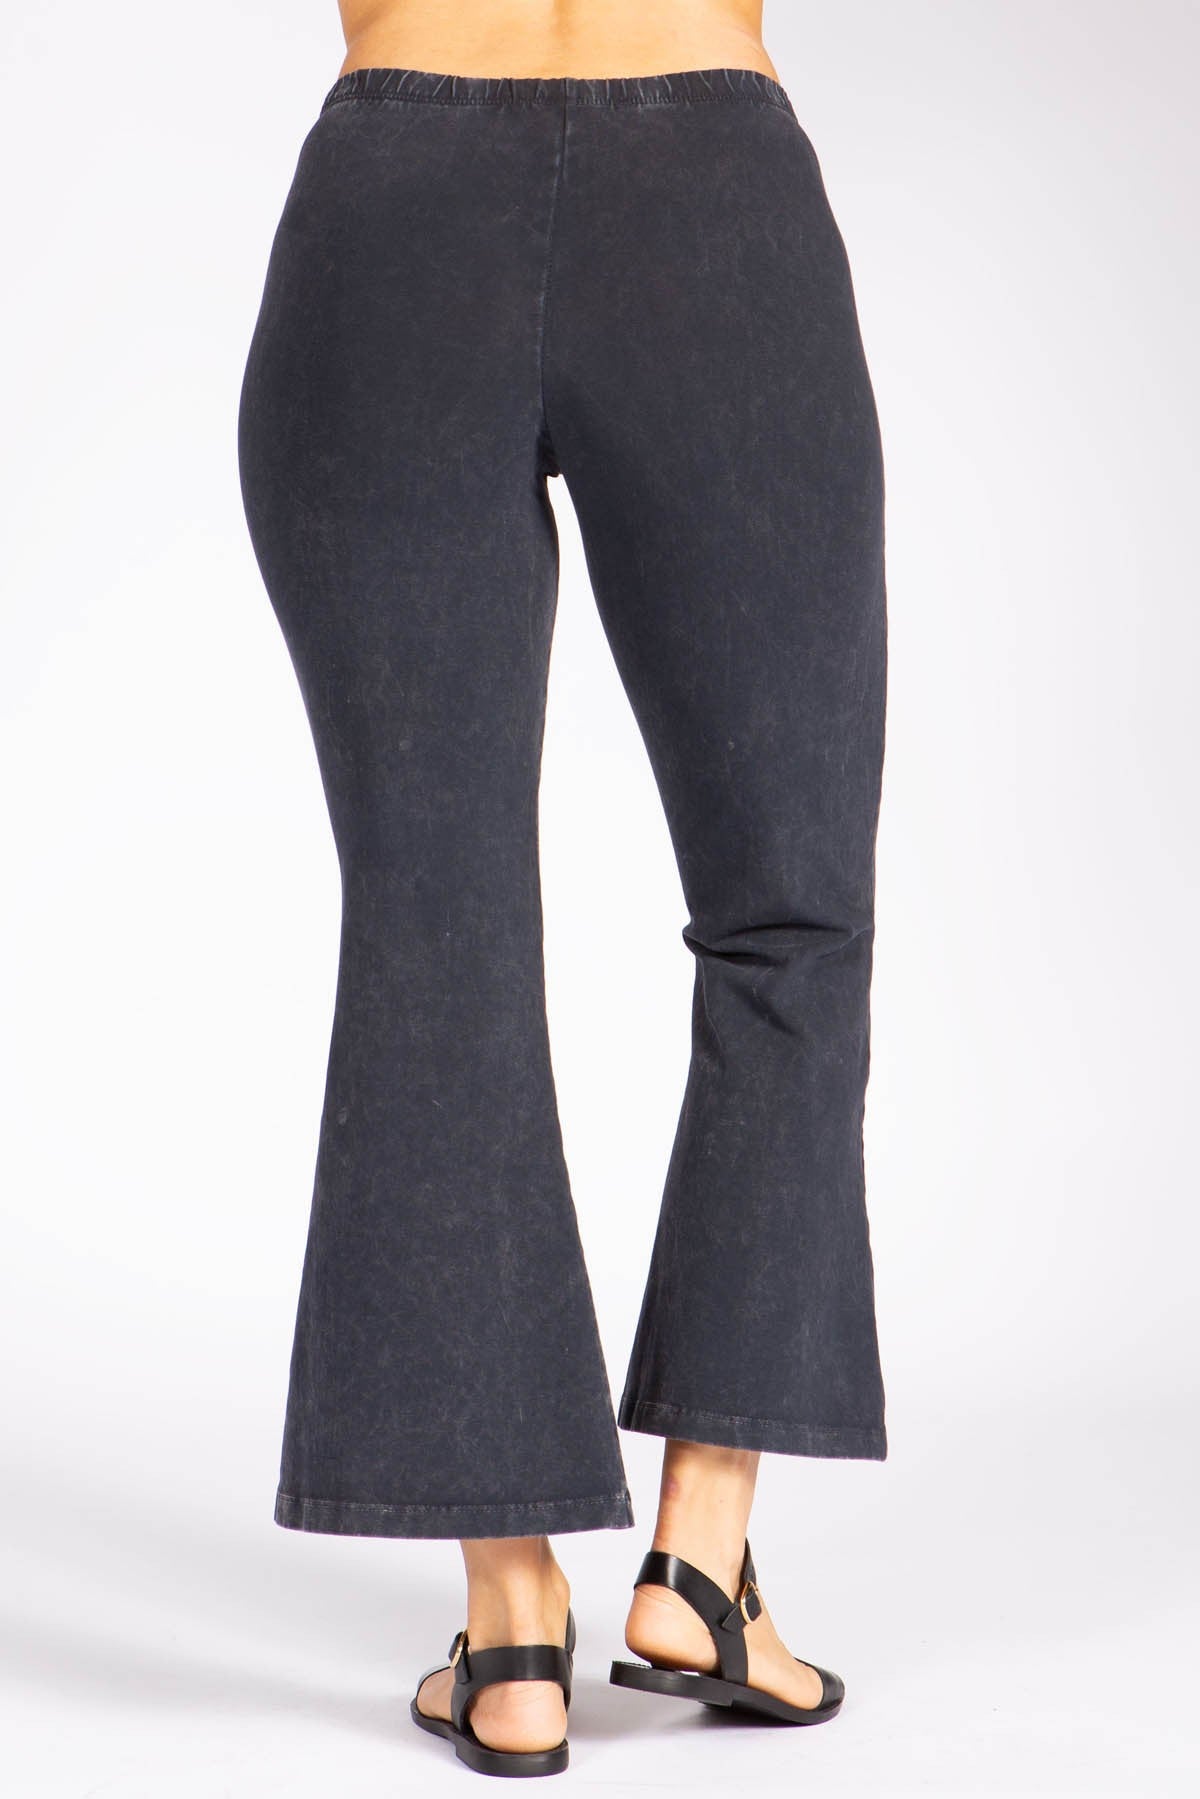 “Angie” Crop Flare Mineral Wash Pants